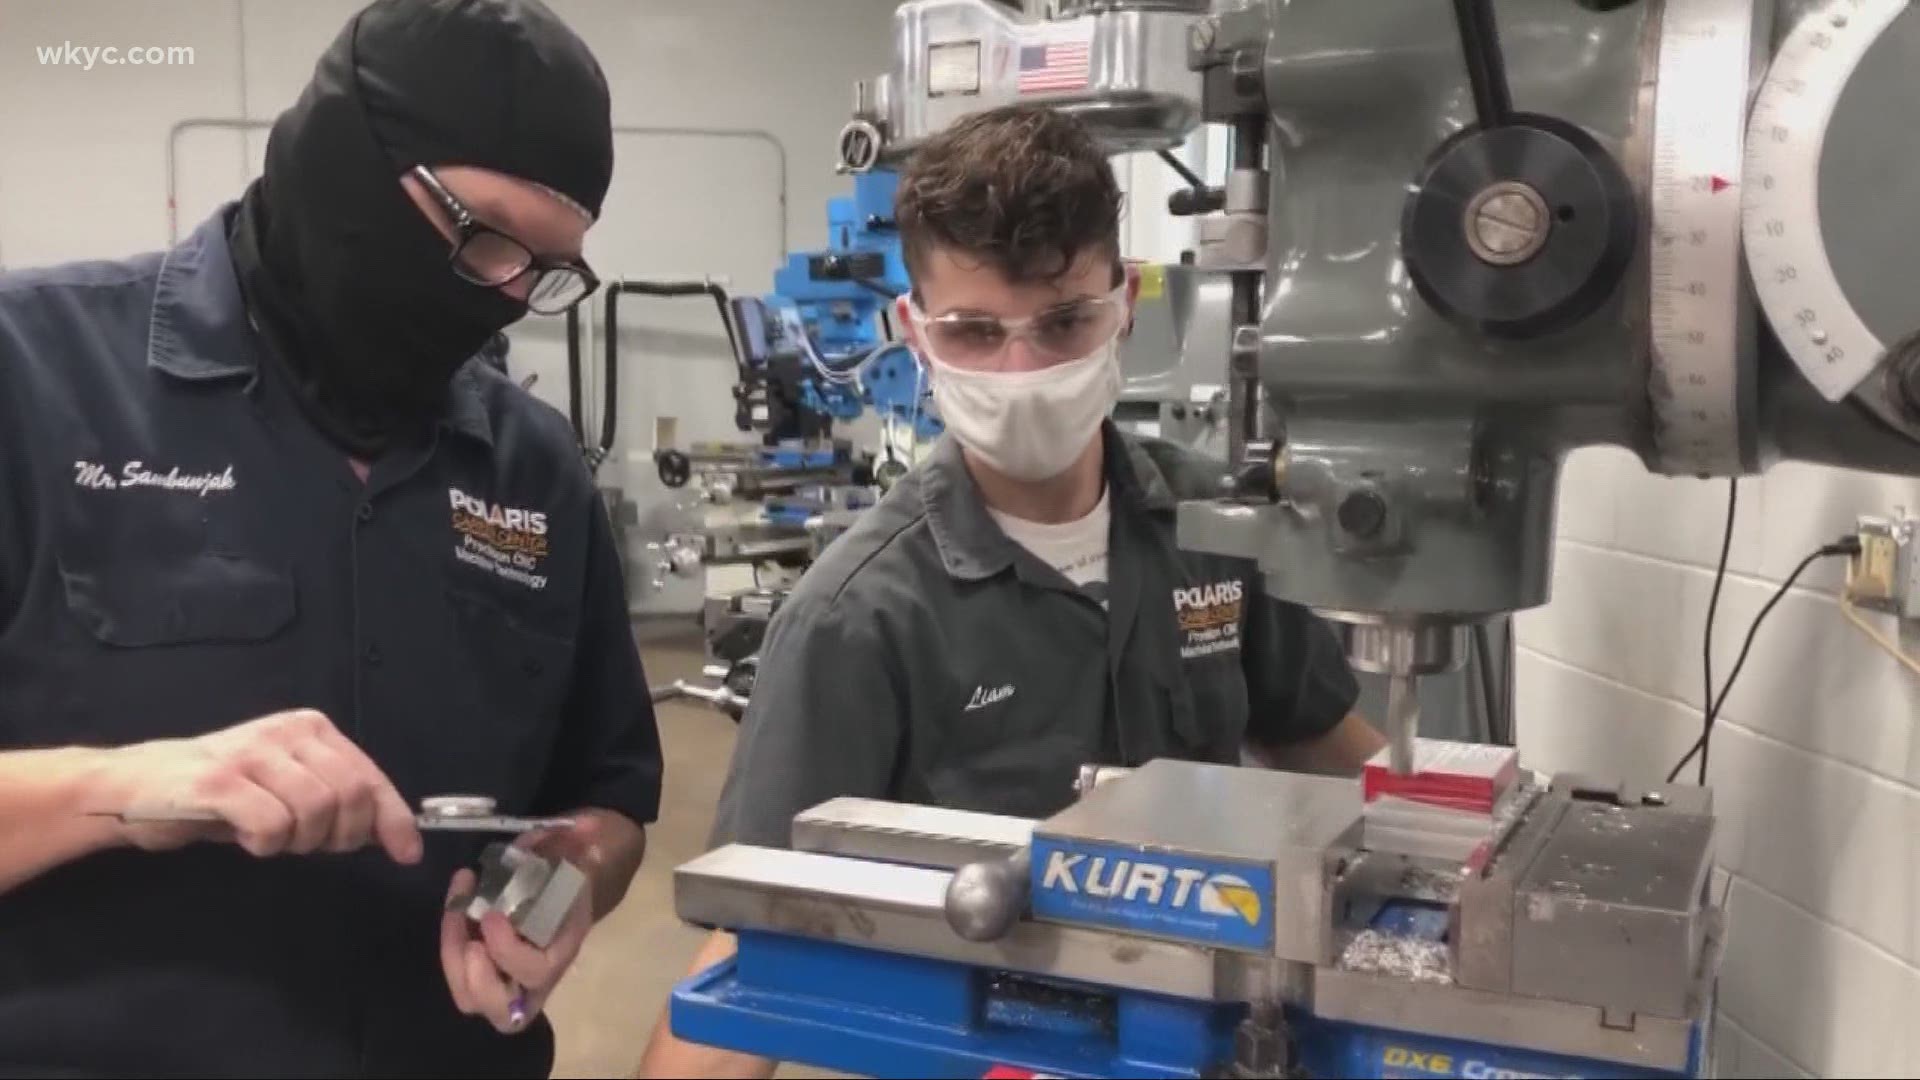 Feb. 19, 2021: Tony Sambunjak is one of those teachers you never forget. The precision machining instructor at Polaris Career Center is getting some big support.